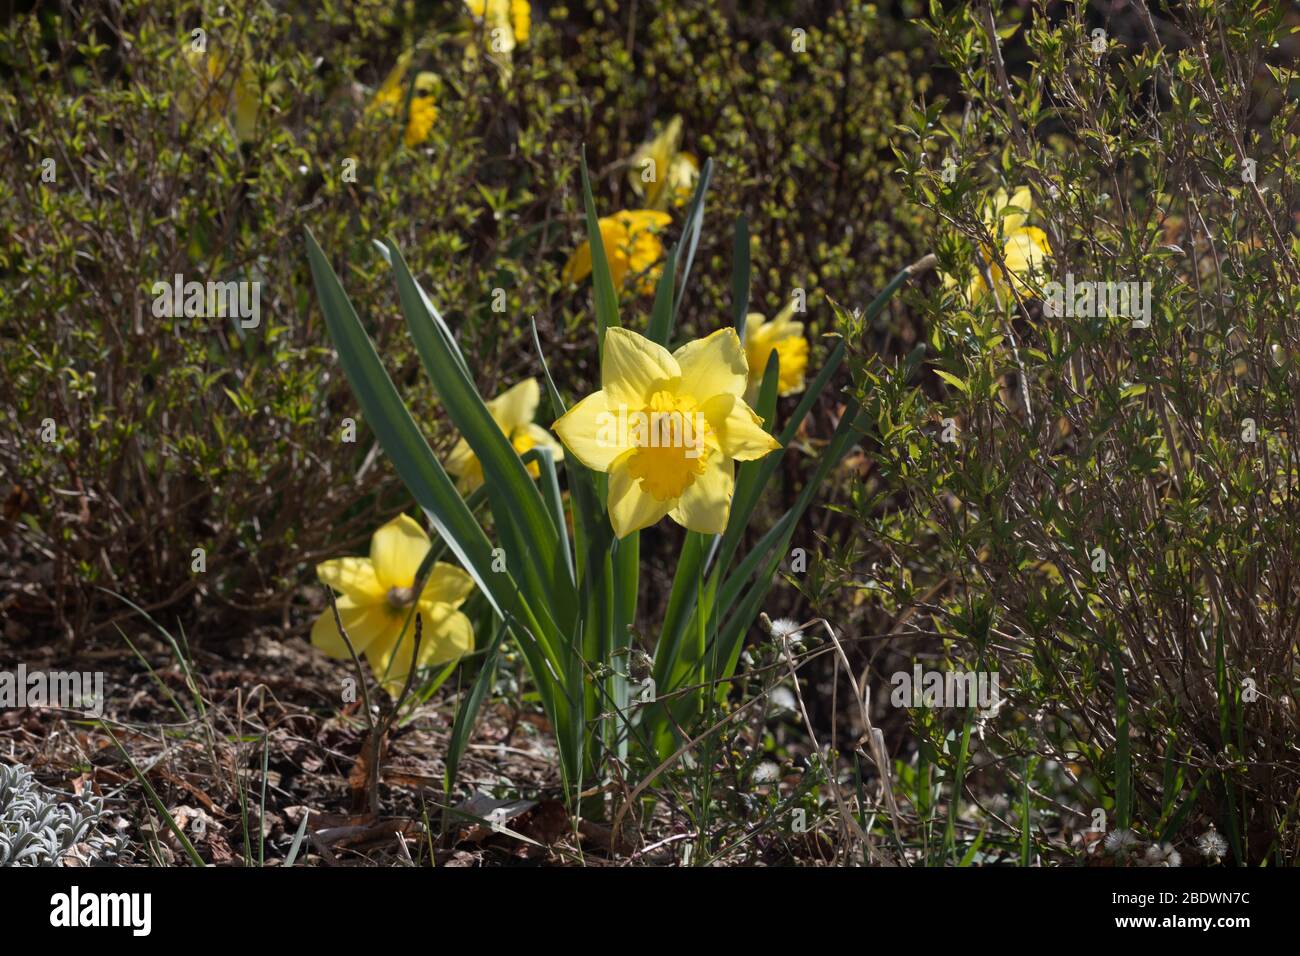 Narcissus is a genus of predominantly spring perennial plant. Stock Photo